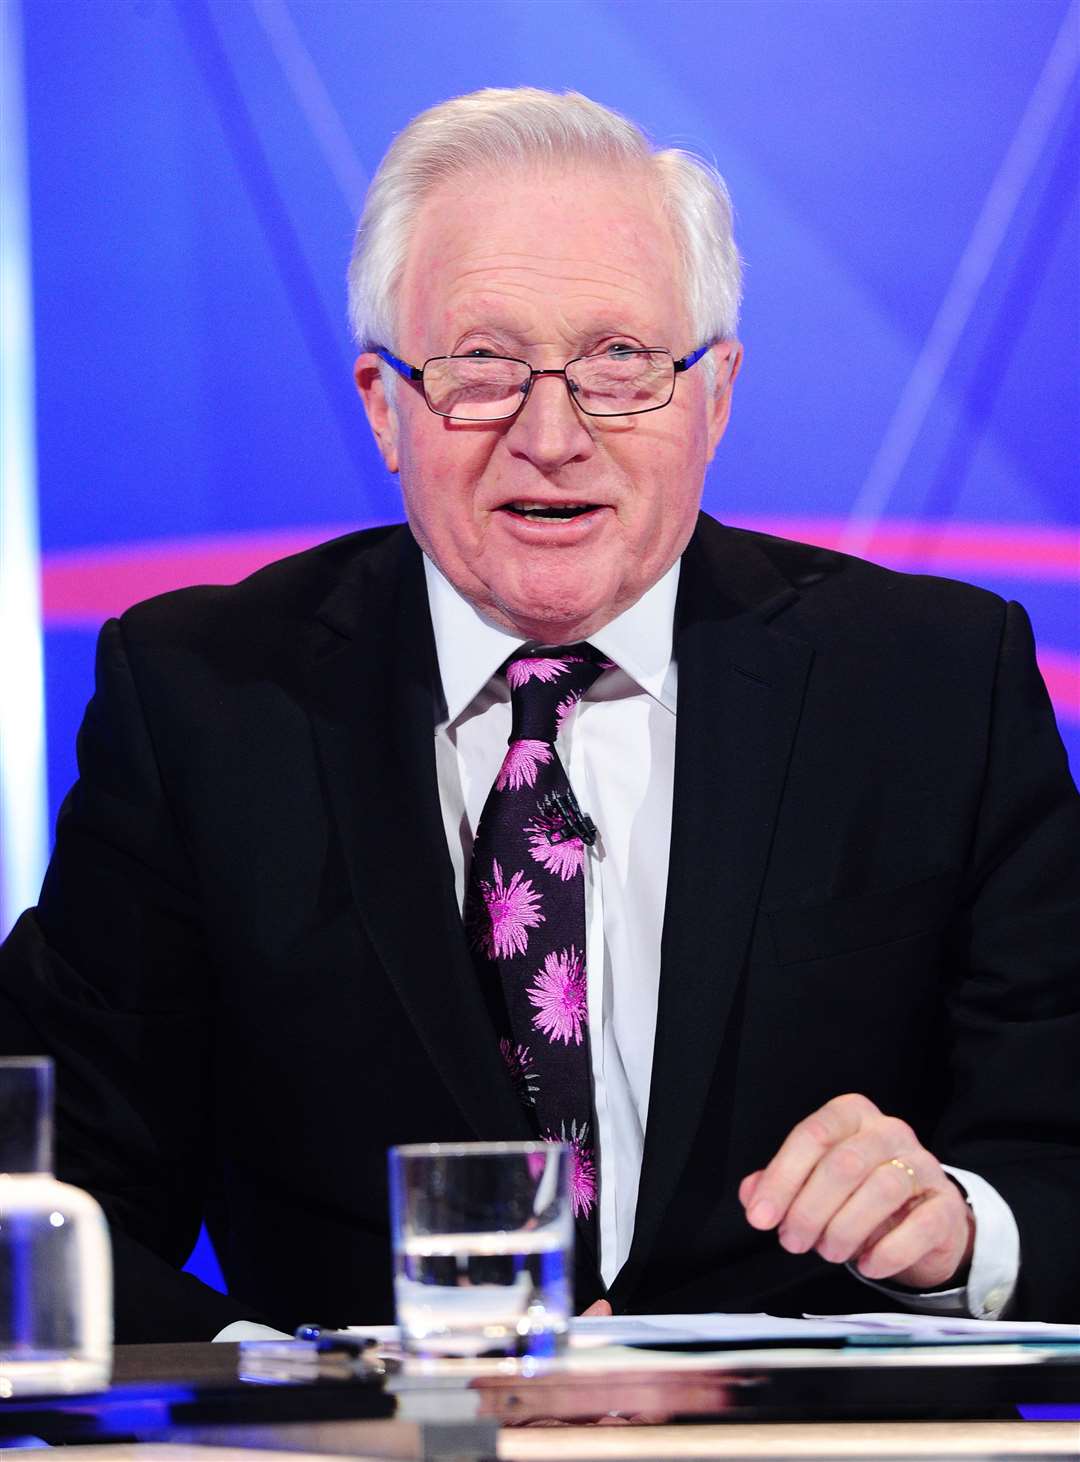 David Dimbleby has suggested the BBC licence fee should be linked to council tax to make it fairer